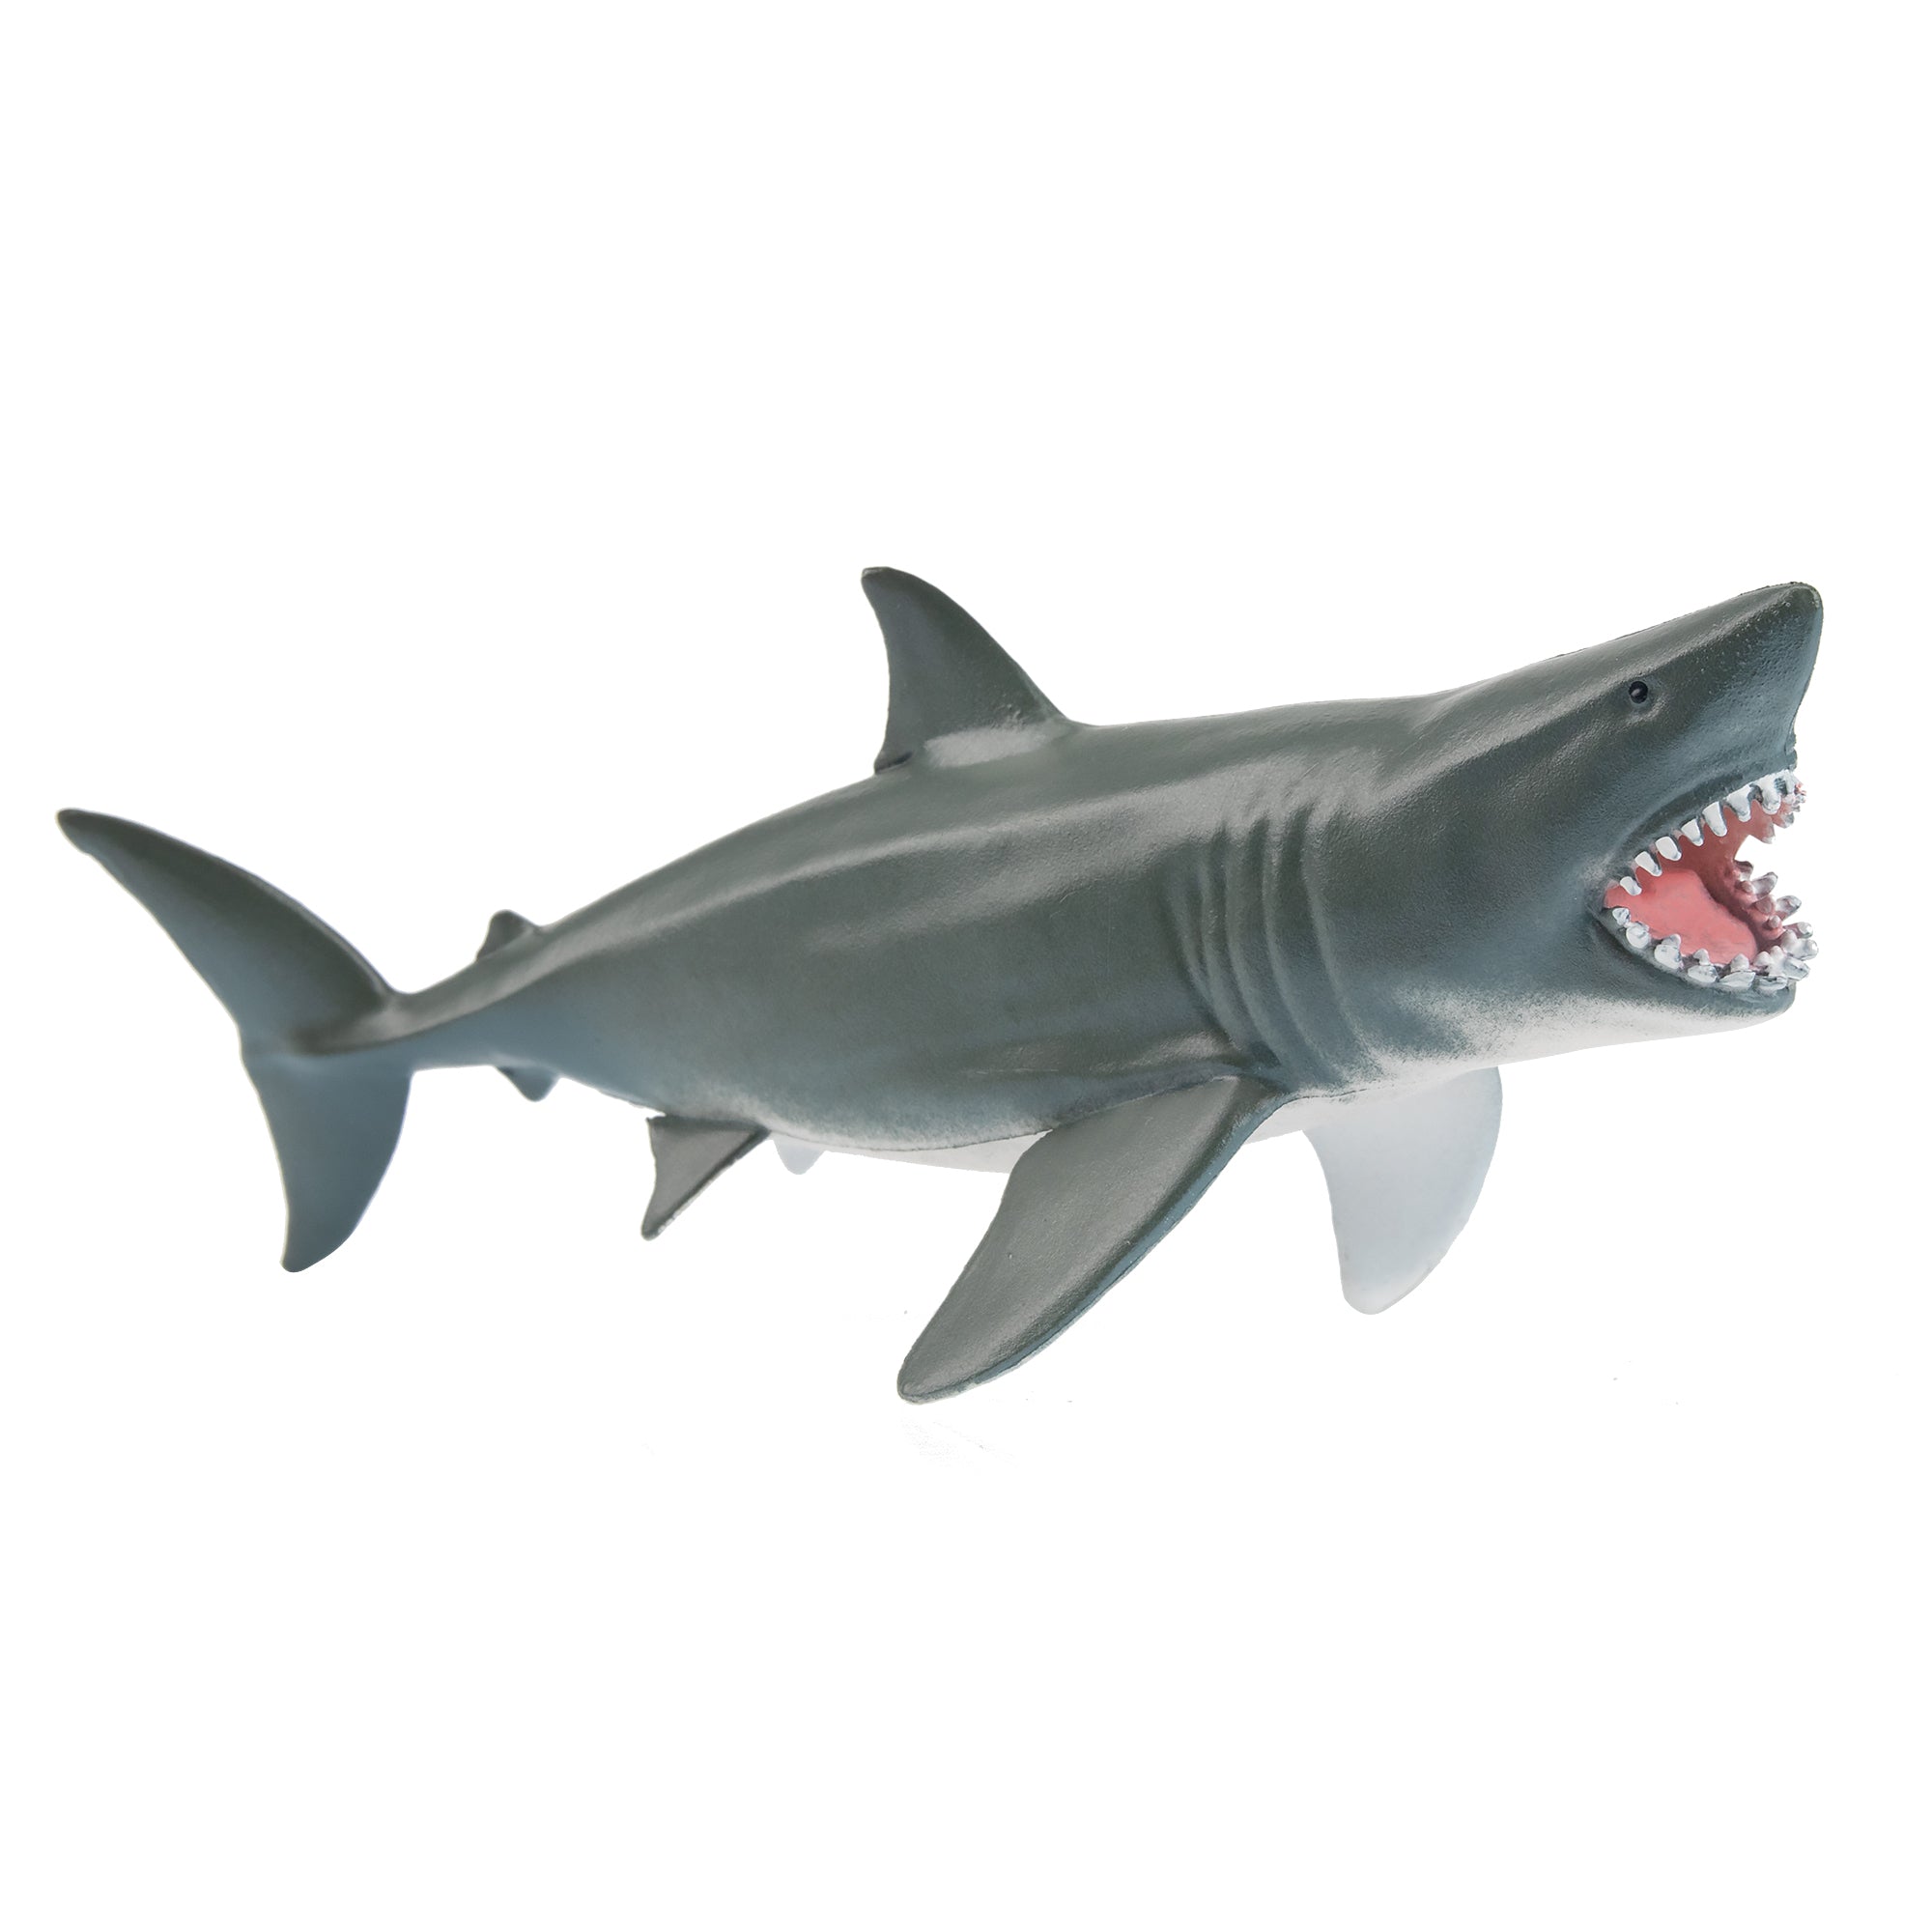 Toymany Open-Mouthed Great White Shark Figurine Toy-2